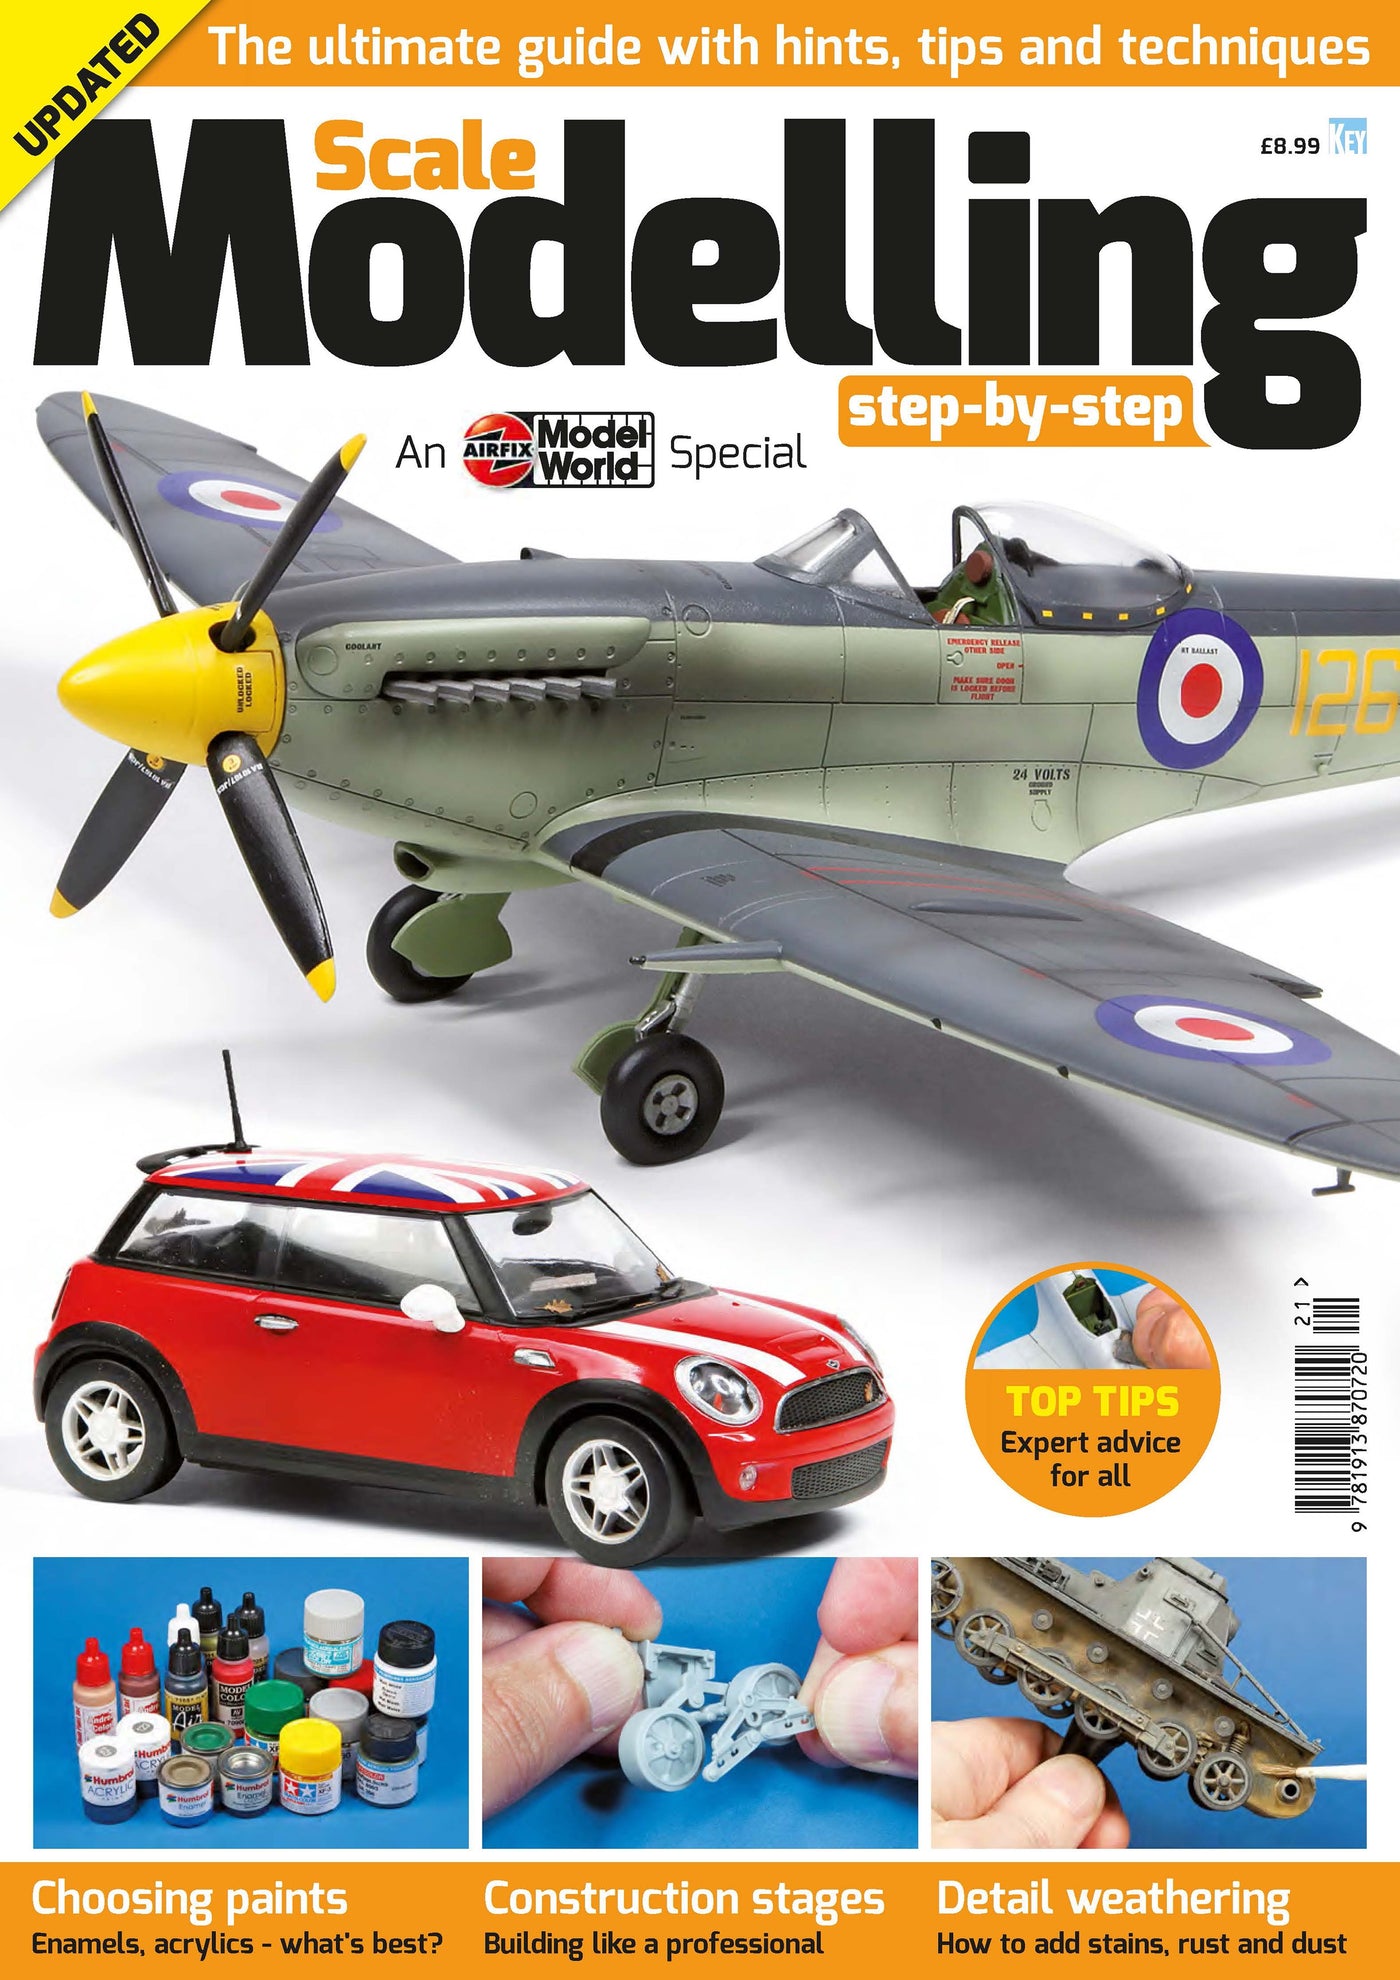 Scale Modelling Step by Step 3rd Edition